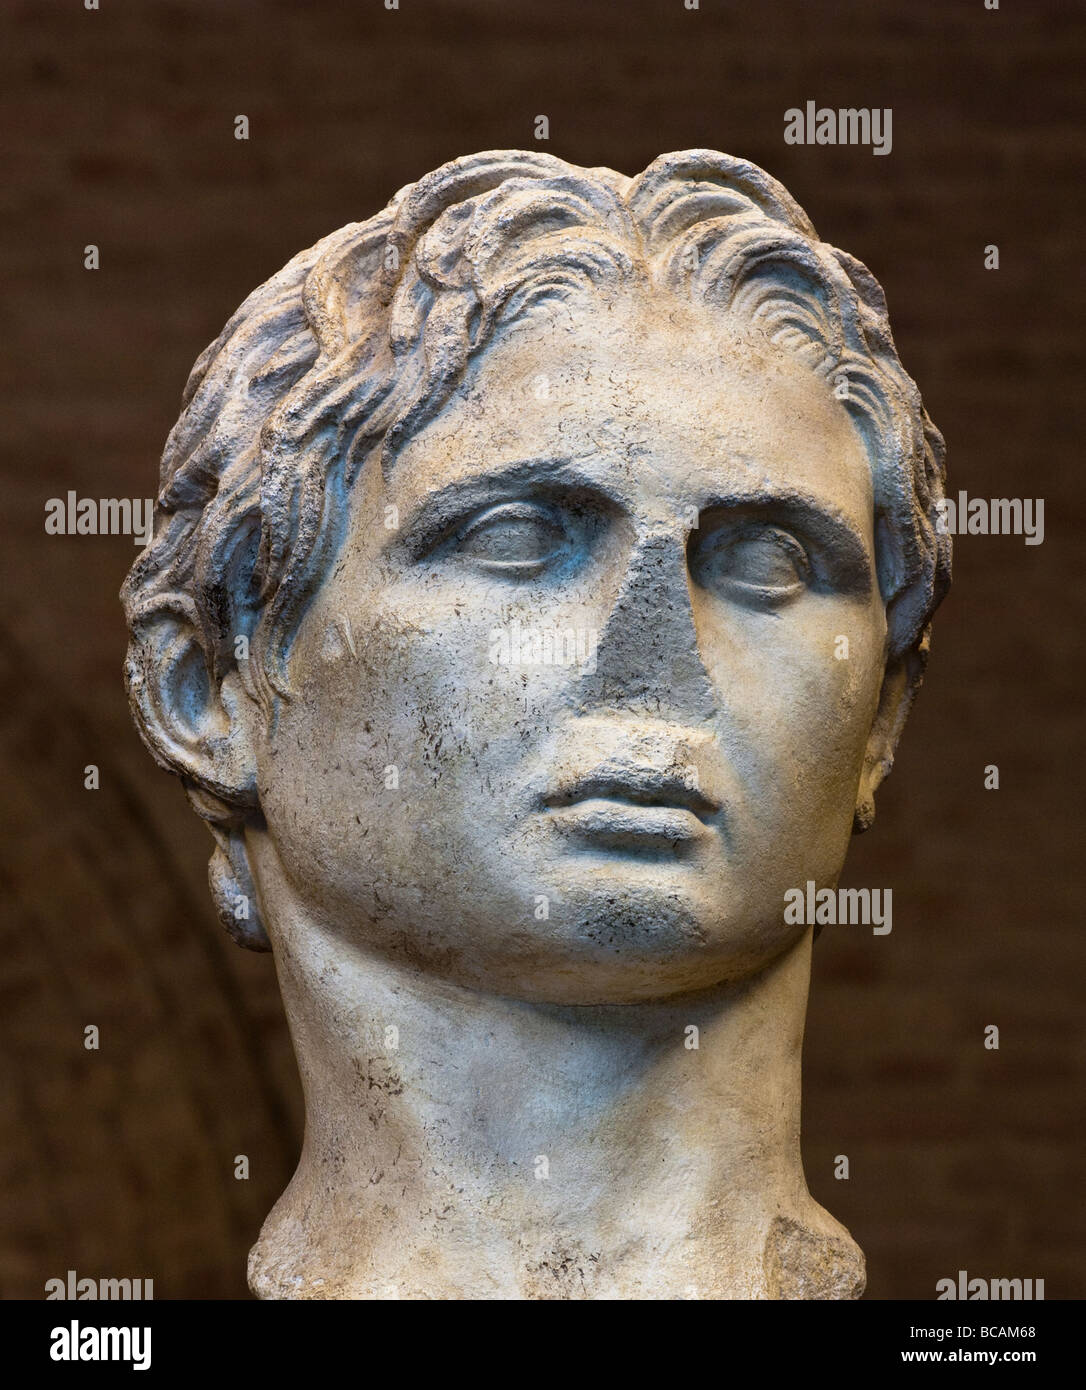 Portrait of Alexander the Great, shown from the approximate vantage point of an ancient viewer. See description for more info. Stock Photo